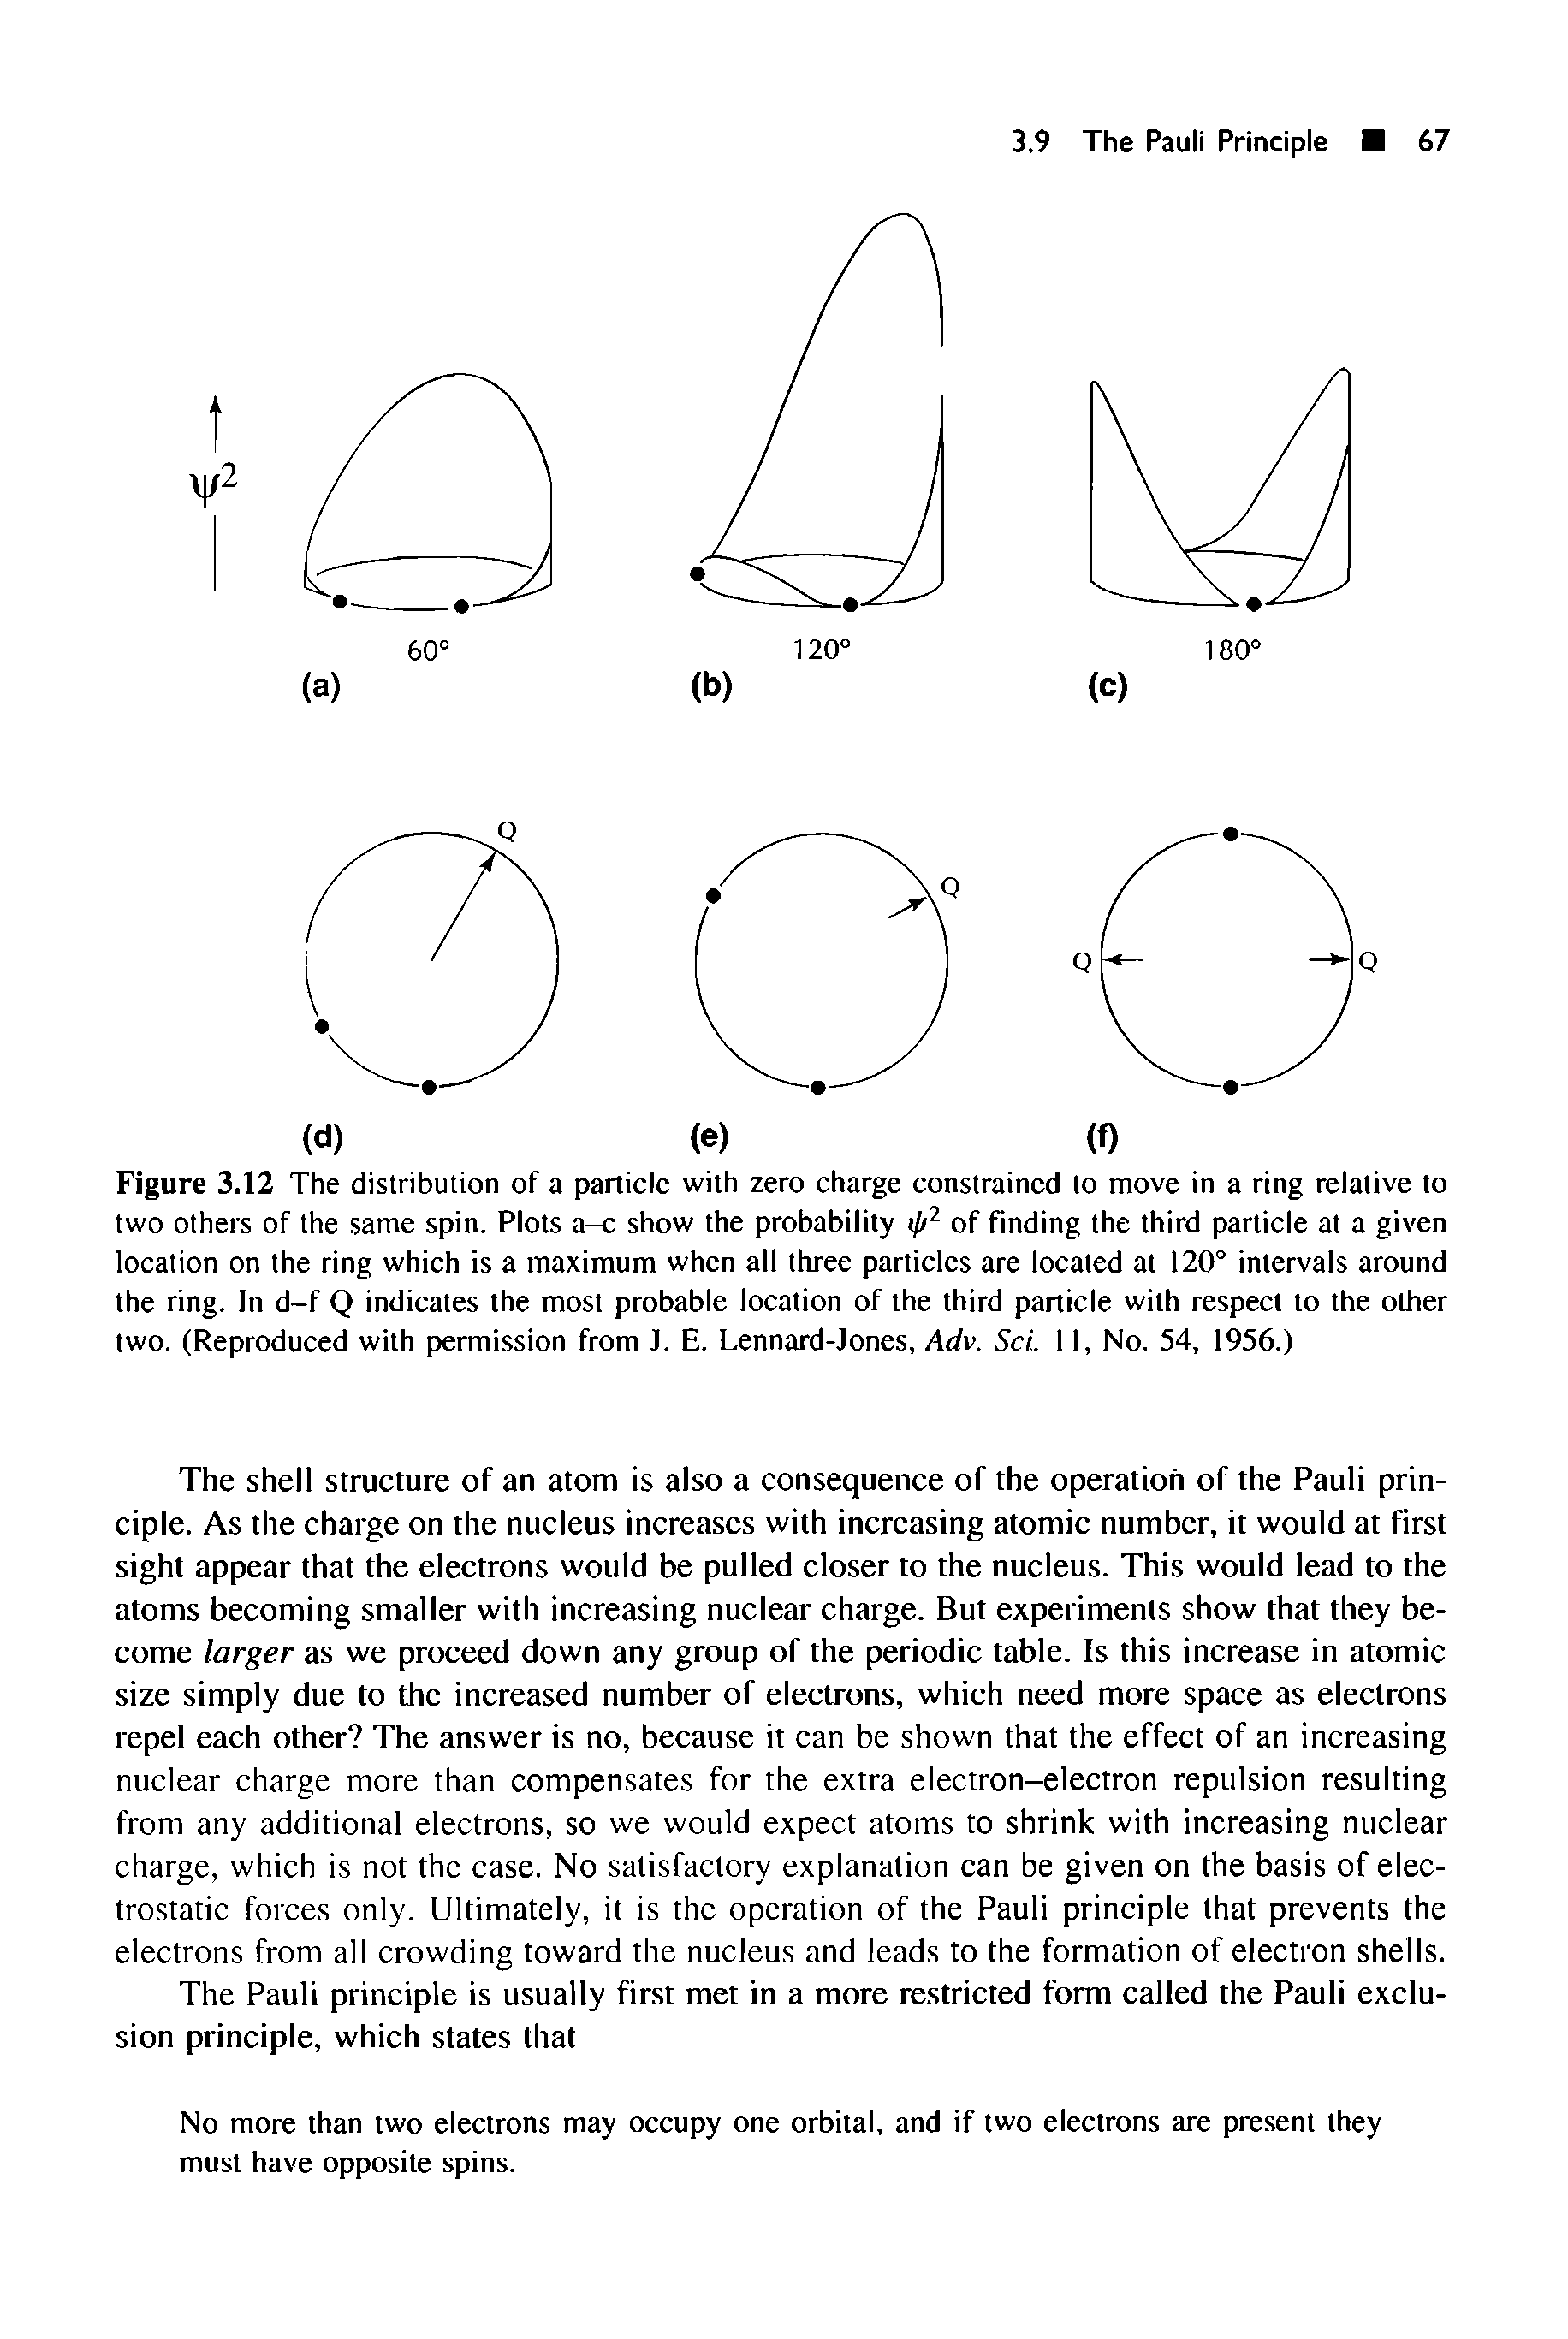 Figure 3.12 The distribution of a particle with zero charge constrained to move in a ring relative to two others of the same spin. Plots a-c show the probability i/i2 of finding the third particle at a given location on the ring which is a maximum when all three particles are located at 120° intervals around the ring. In d-f Q indicates the most probable location of the third particle with respect to the other two. (Reproduced with permission from J. E. Lennard-Jones, Adv. Sci. 11, No. 54, 1956.)...